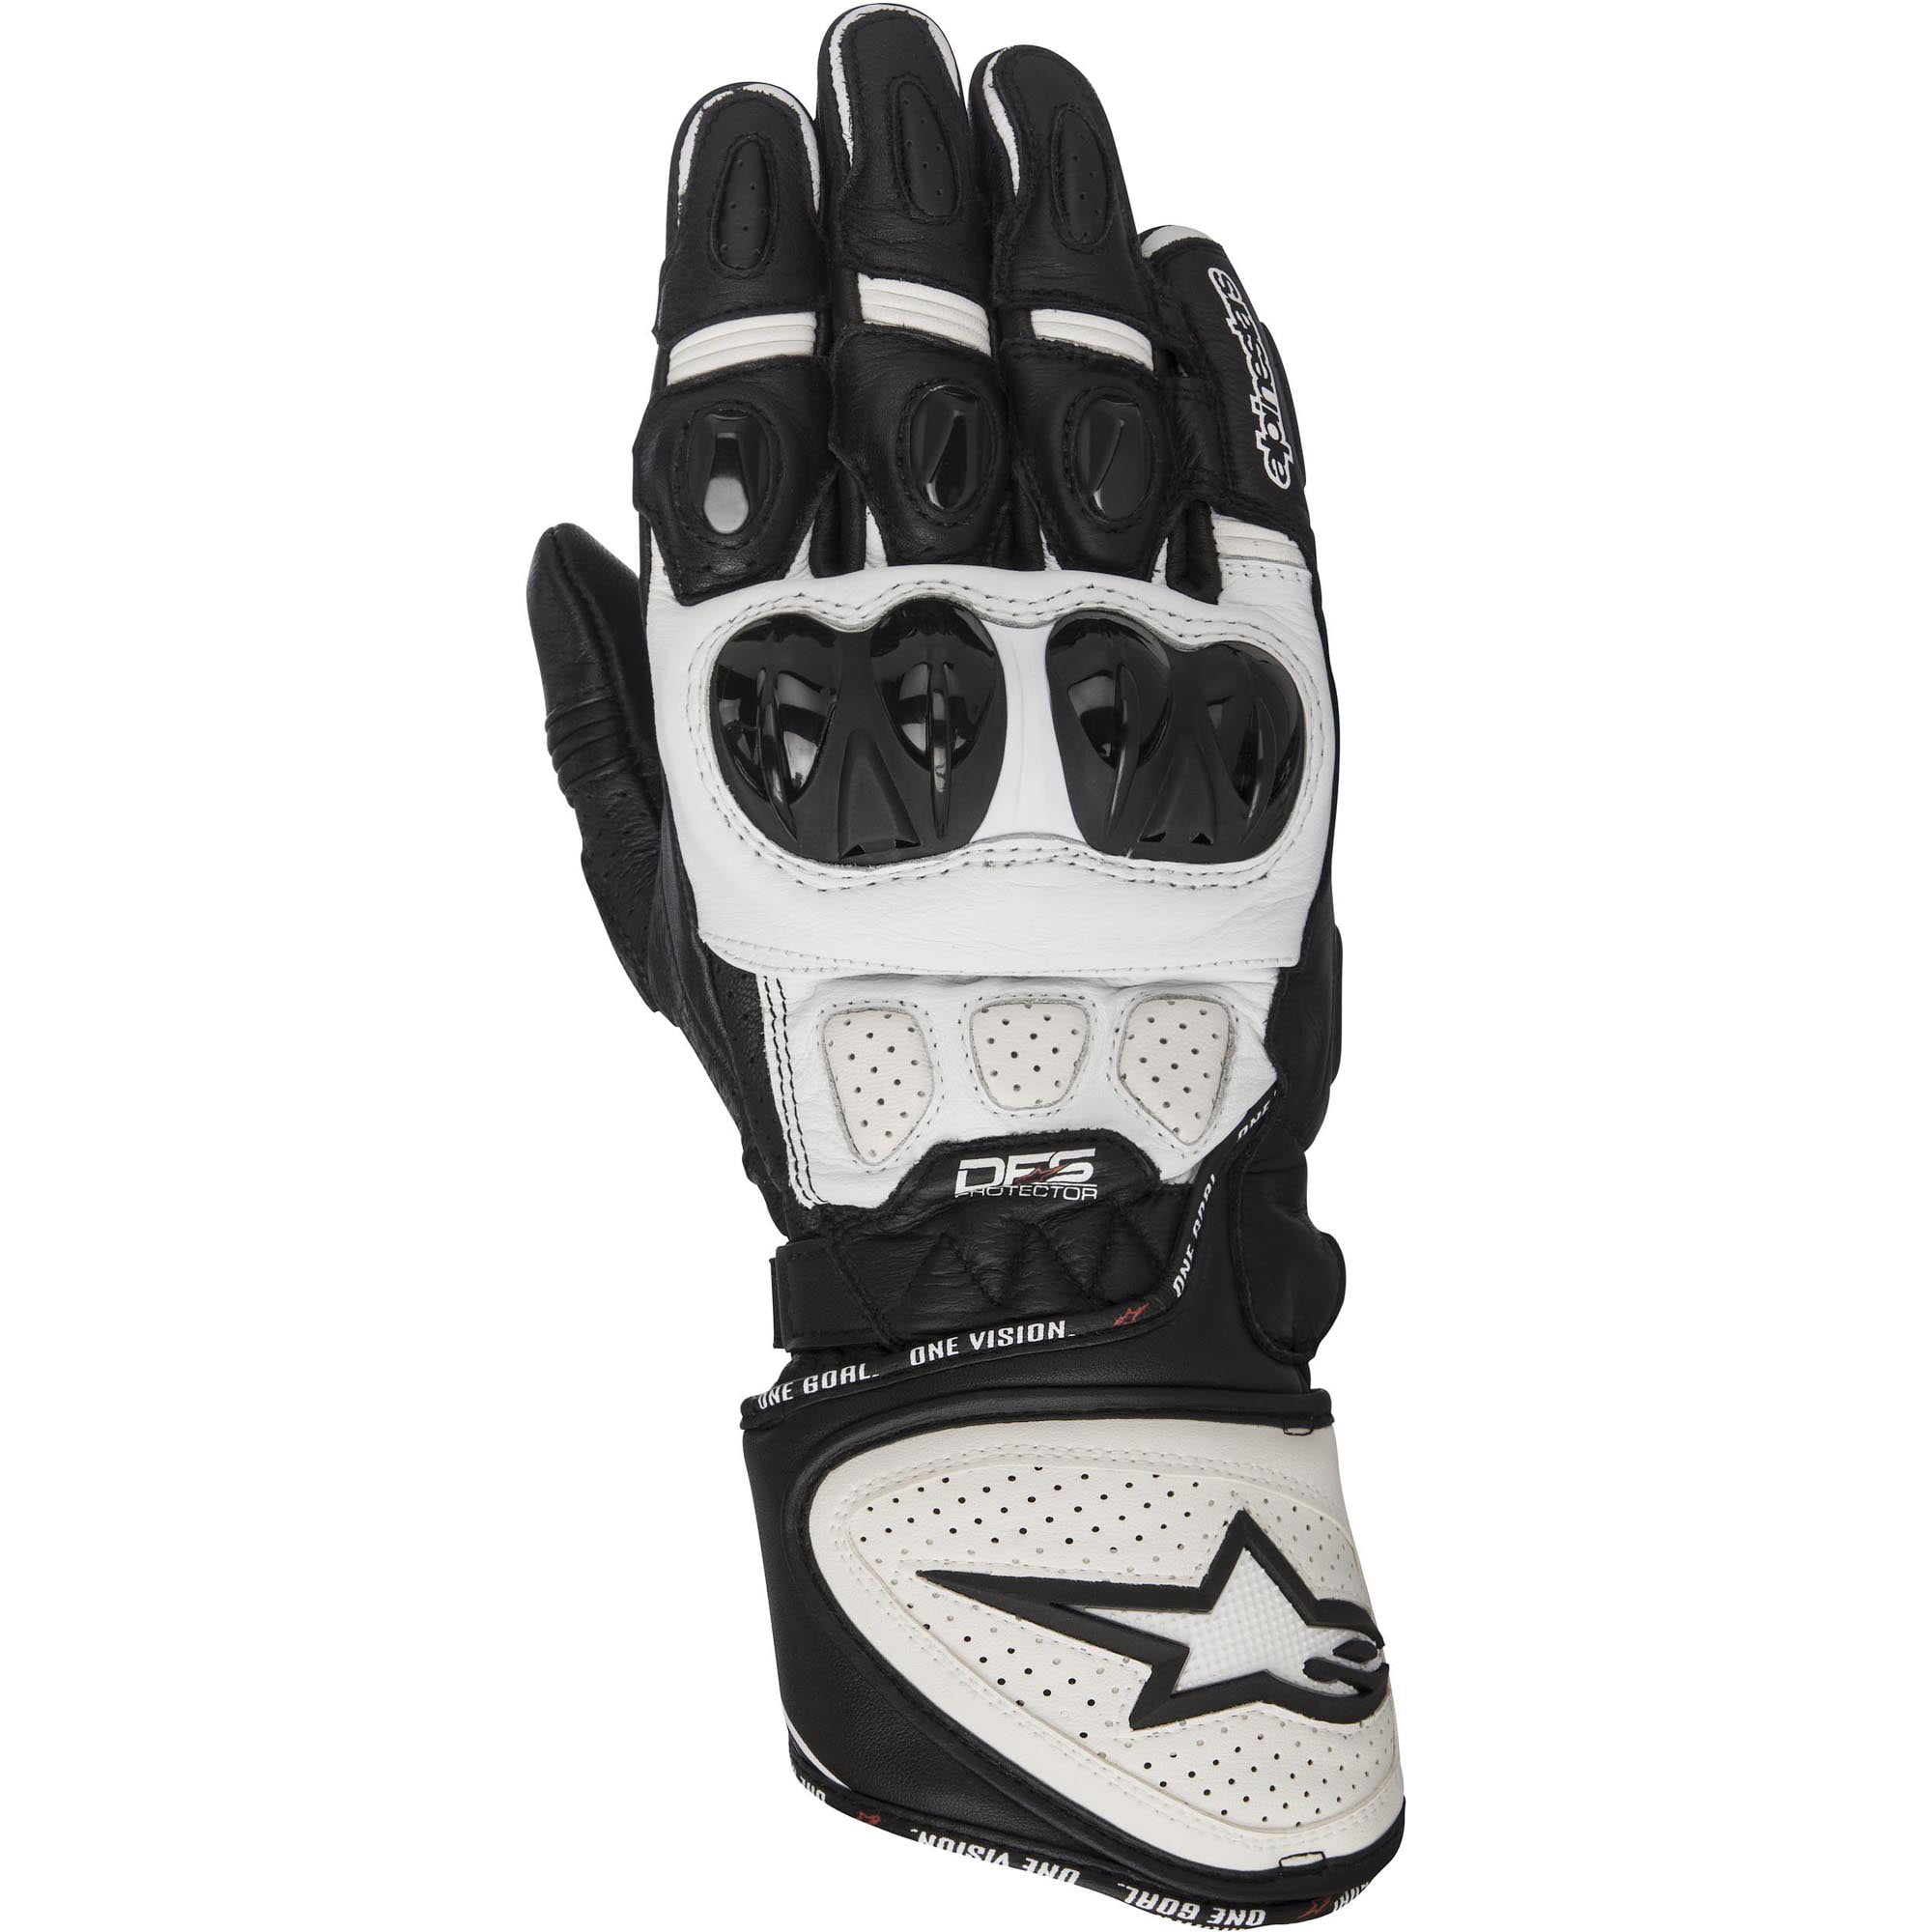 Pick Size/Color 2019 Alpinestars GP Plus R Leather Motorcycle Gloves 